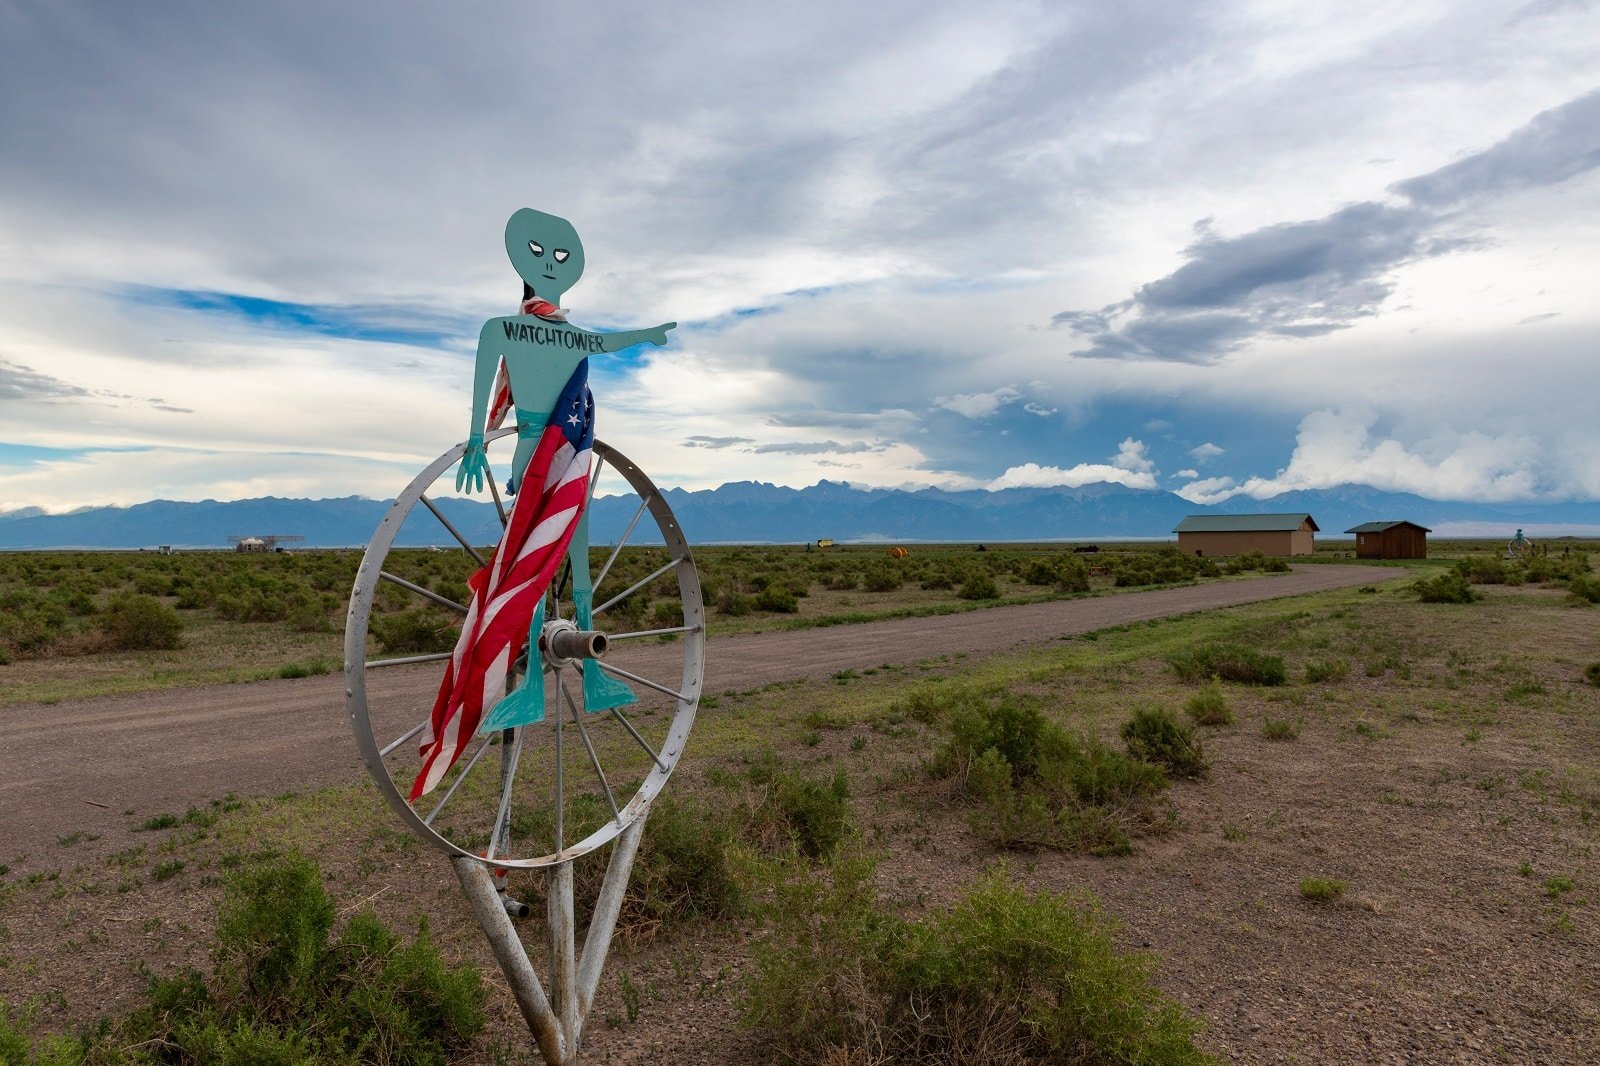 <p><span>The UFO Watchtower in Hooper, Colorado, offers a unique experience for those intrigued by the unknown. This observation platform and garden, adorned with alien-themed sculptures and a designated “vortex” area, provide a panoramic view of the San Luis Valley, known for its high number of UFO sightings.</span></p> <p><span>The site has become a gathering place for UFO enthusiasts and curious travelers. Camping is available, allowing visitors to stargaze and perhaps catch a glimpse of something unexplained.</span></p> <p><b>Insider’s Tip: </b><span>Camp overnight for a chance to stargaze and maybe spot a UFO.</span></p> <p><b>When To Travel: </b><span>Summer offers the best chance for clear skies and UFO events.</span></p> <p><b>How To Get There: </b><span>Located off Highway 17 in the San Luis Valley.</span></p>